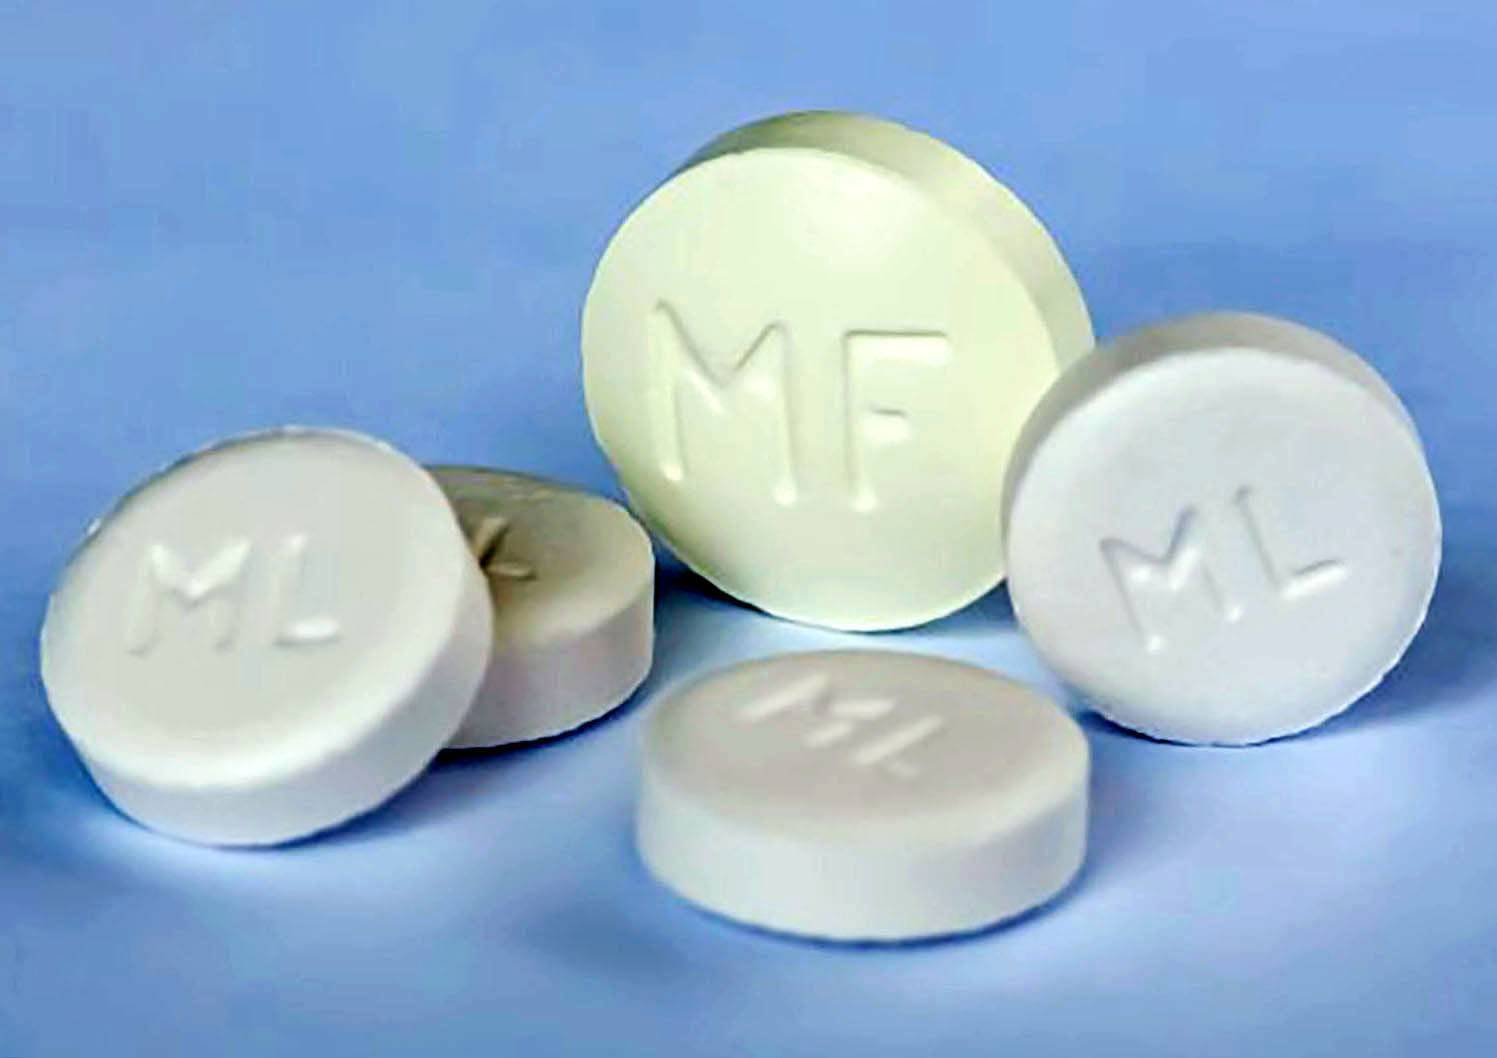 The Mefeego pill pack developed by British pharmaceutical company Linepharma International can terminate a pregnancy of up to nine weeks of gestation, and is considered safer than surgical abortions. | LINEPHARMA INTERNATIONAL / VIA KYODO